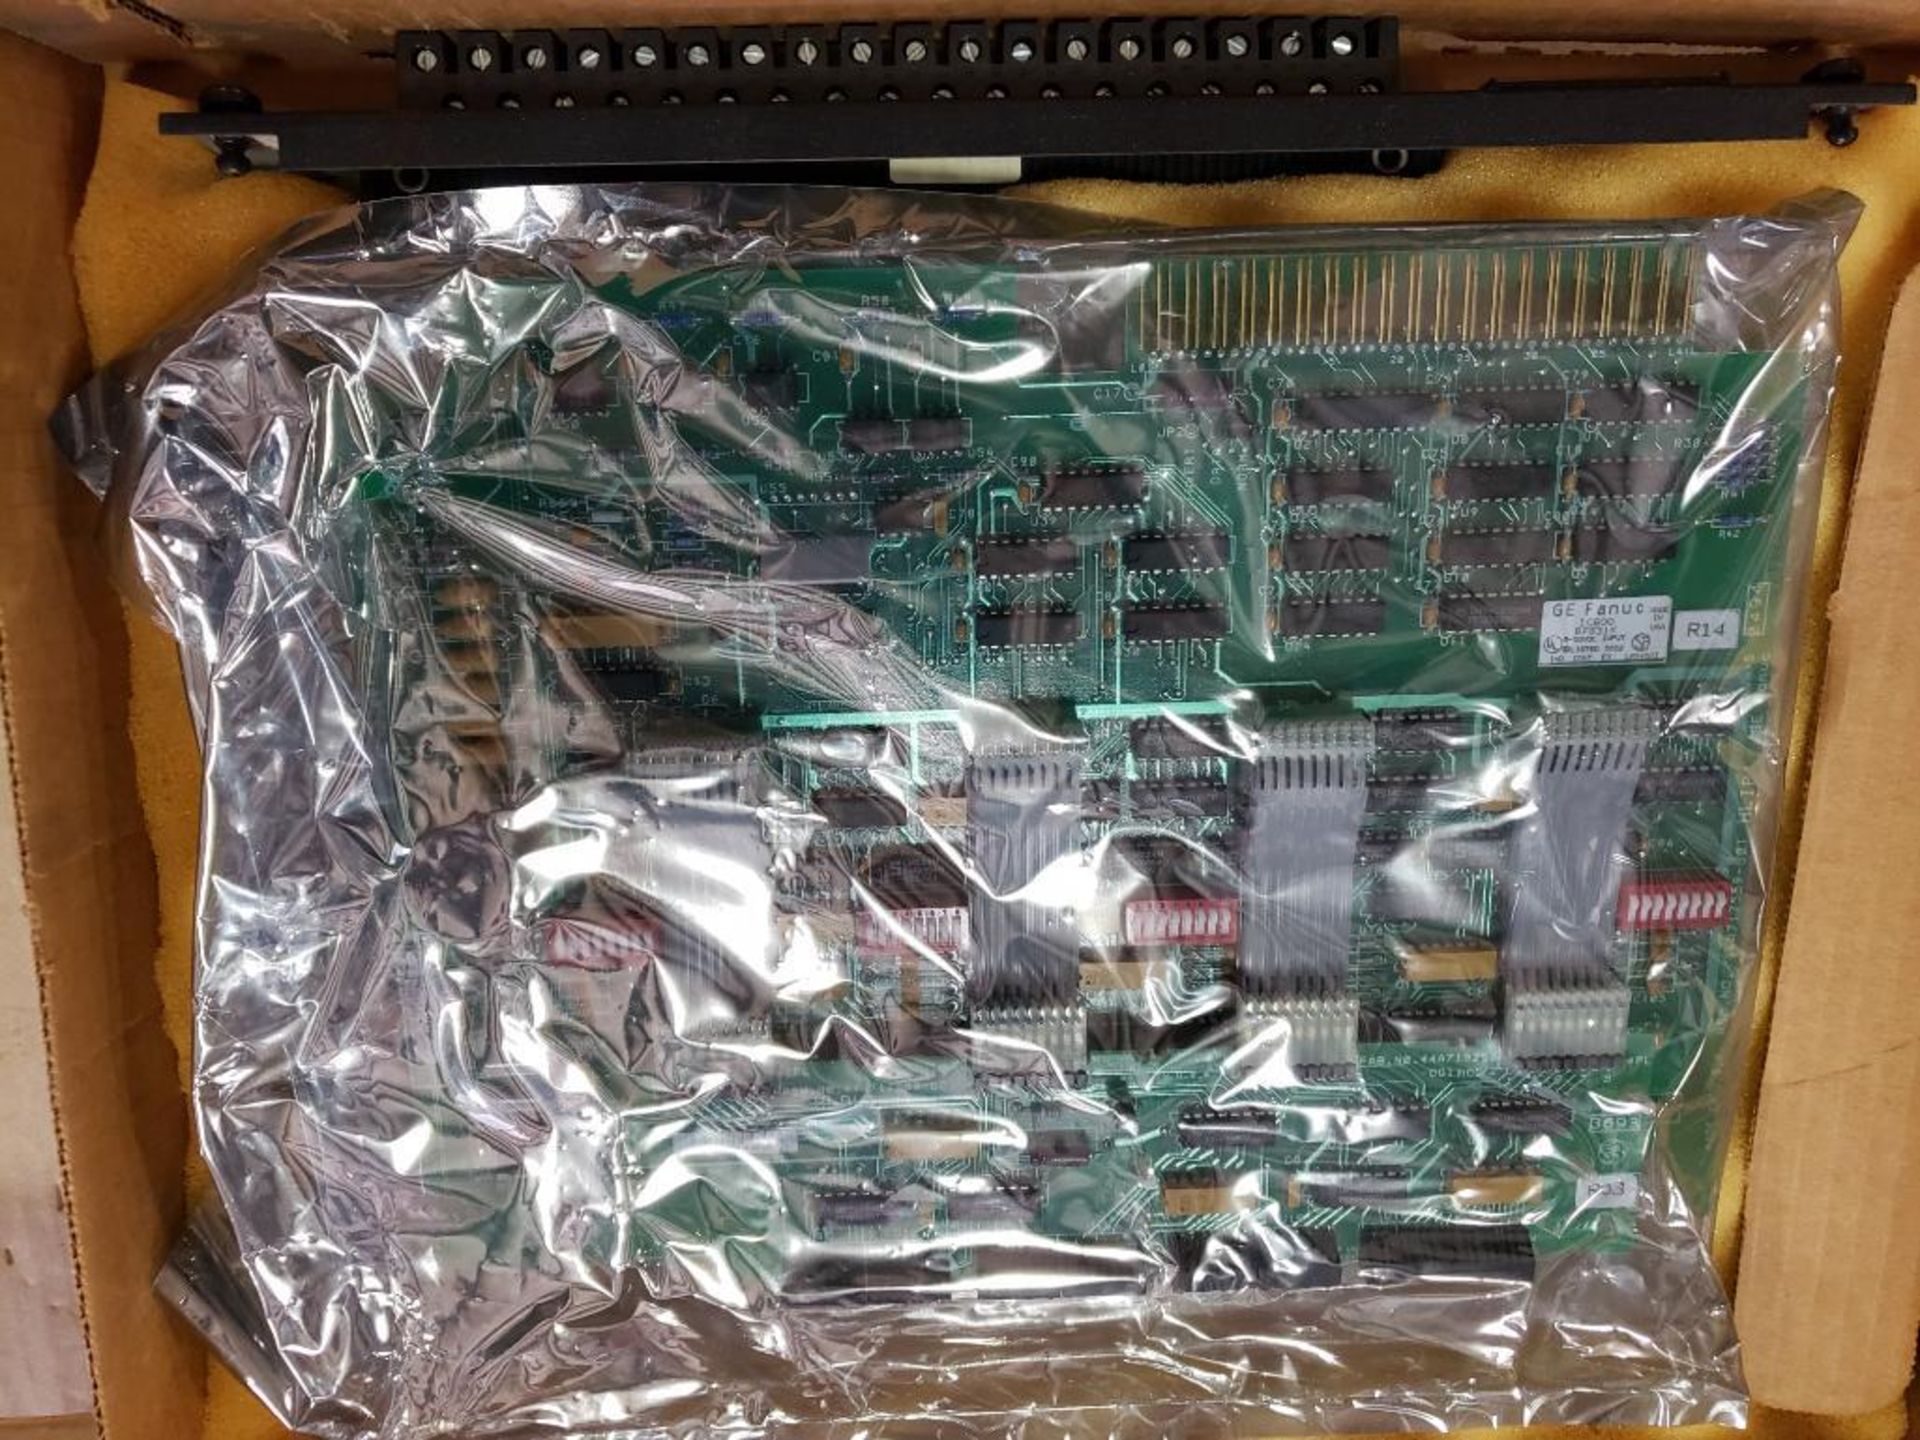 Qty 3 - Assorted GE Fanuc boards. Open boxes, appear refurb. units. - Image 6 of 9